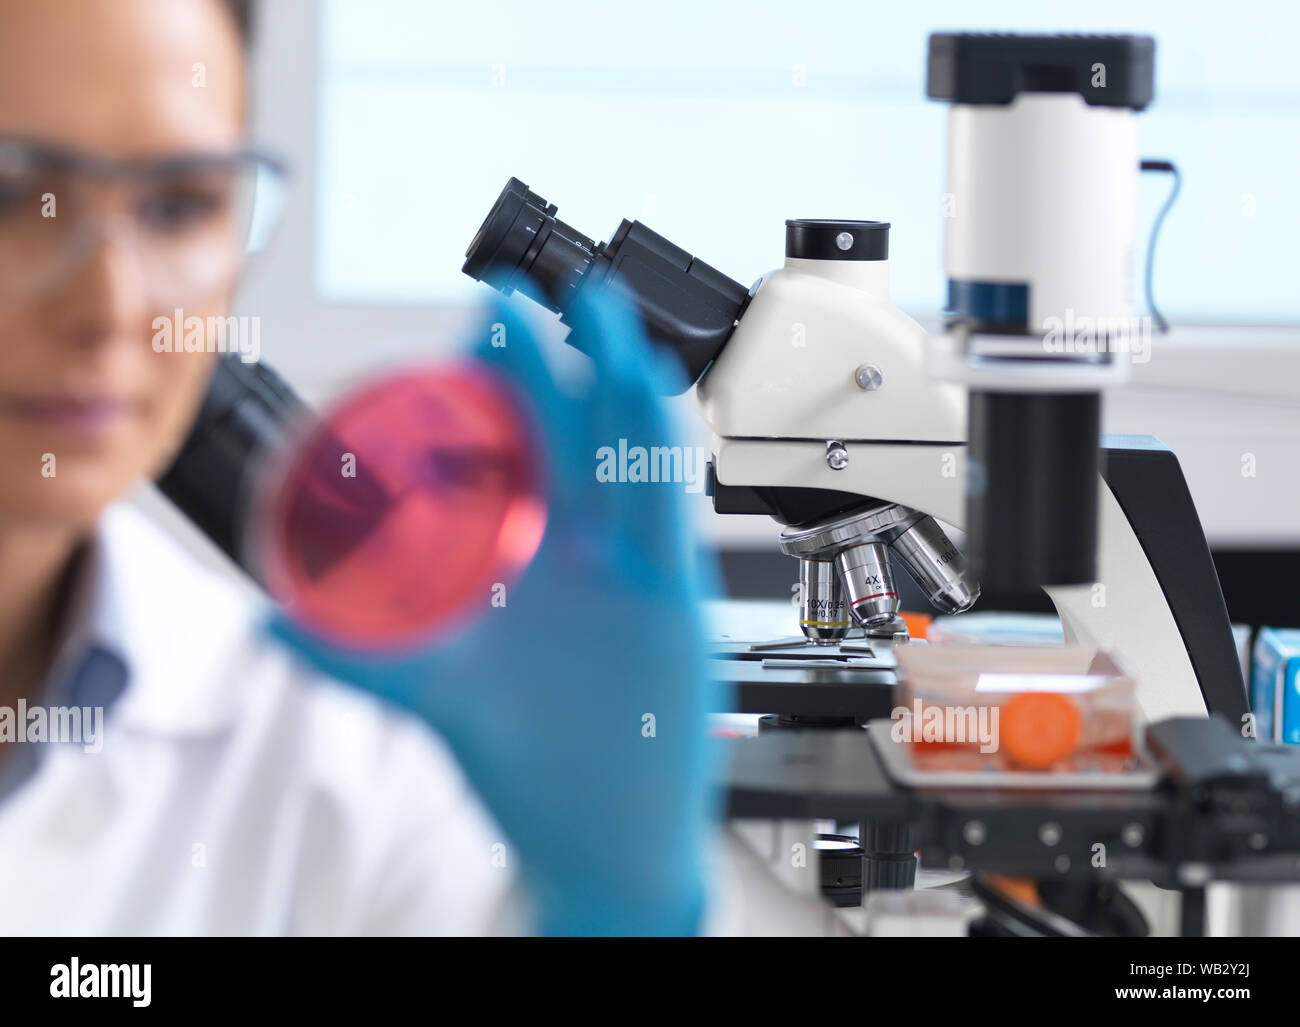 Microbiology research. Scientist examining bacterial cultures growing in a petri dish. Stock Photo